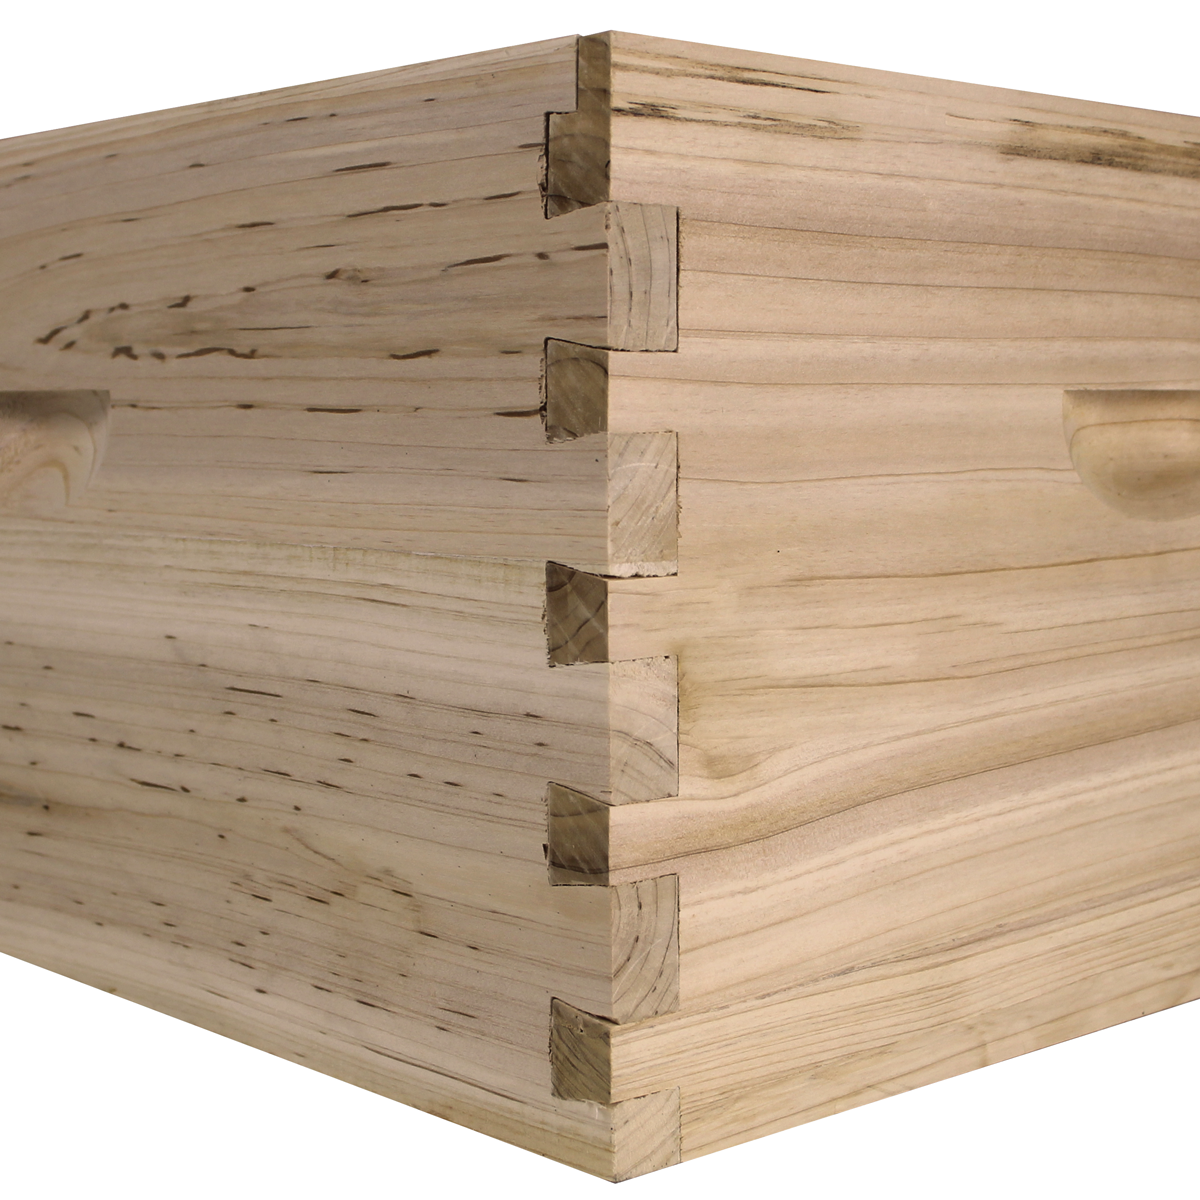 NuBee 10 Frame Deep Bee Box Uses Dovetail Joints